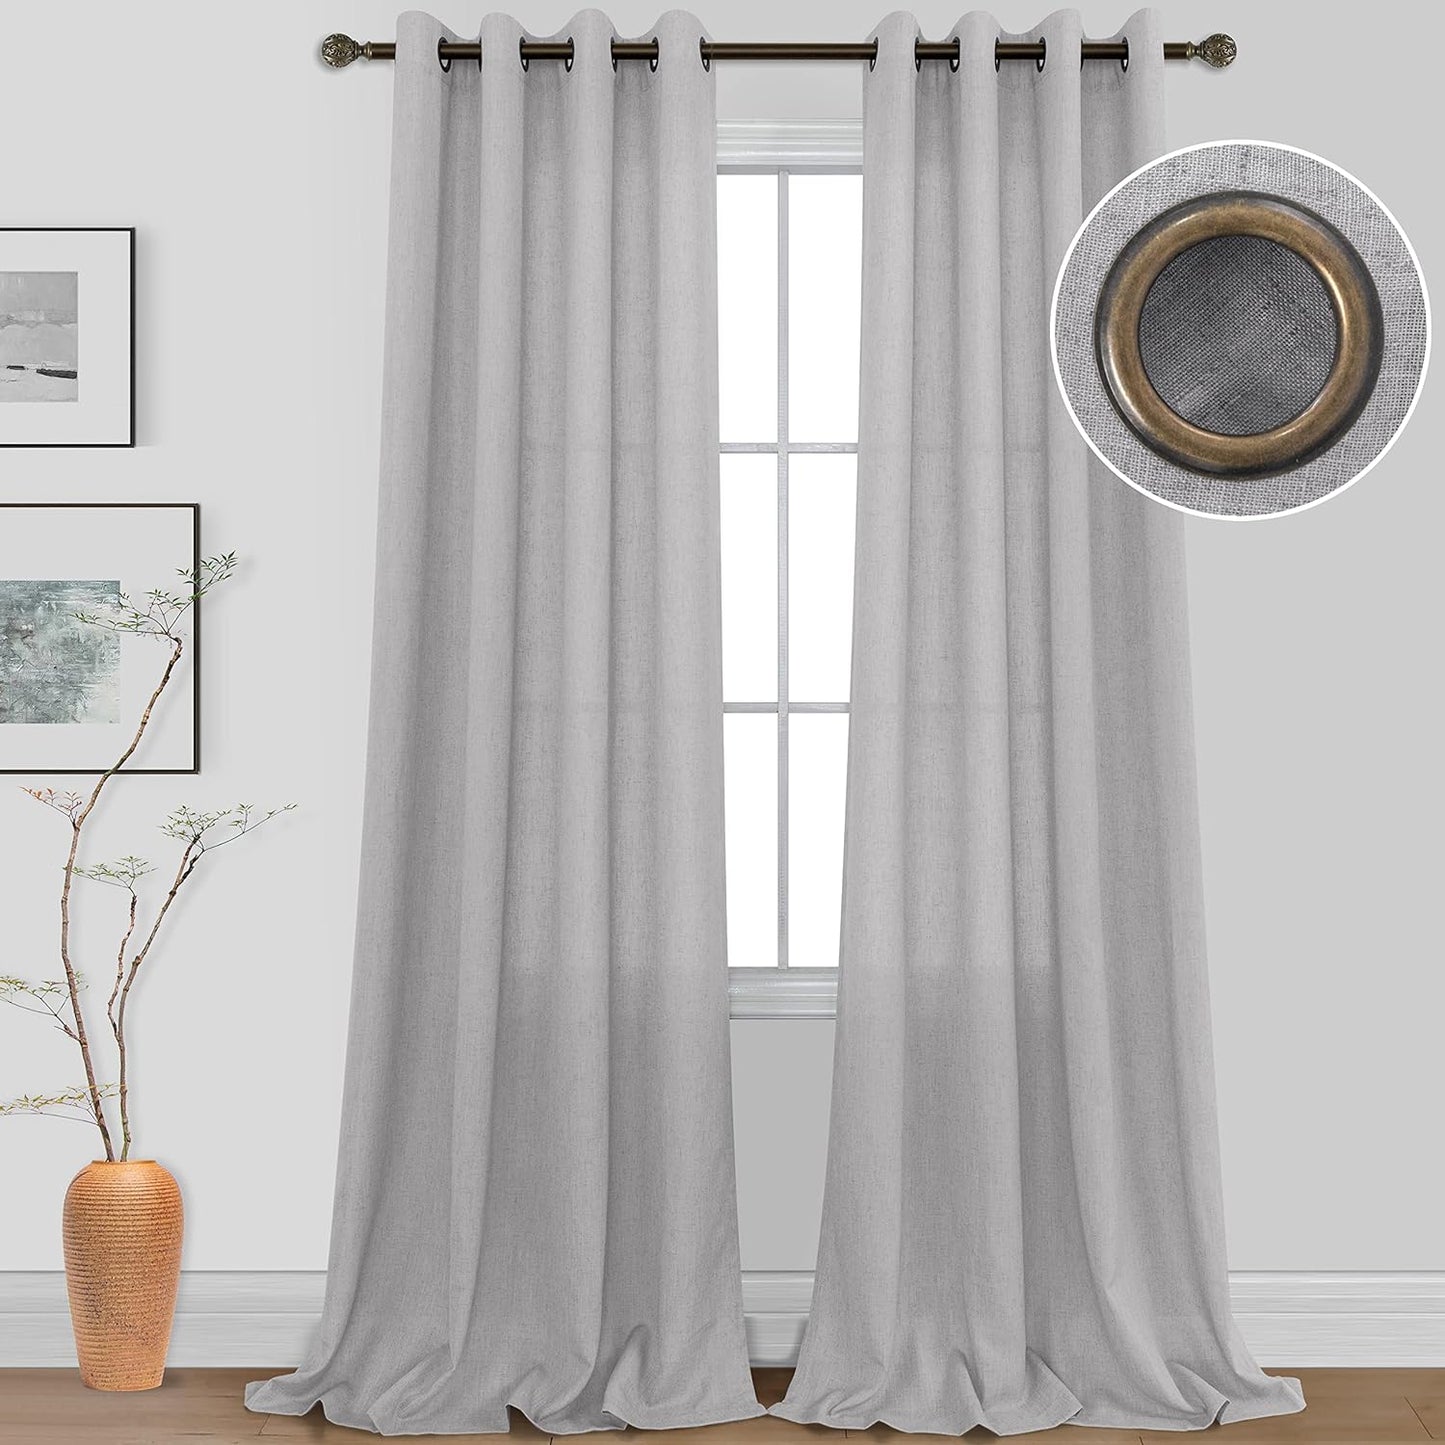 KOUFALL Beige Rustic Country Curtains for Living Room 84 Inches Long Flax Linen Bronze Grommet Tan Sand Color Solid Faux Linen Curtains for Bedroom Sliding Glass Patio Door 2 Panels  KOUFALL TEXTILE Grey 52X108 